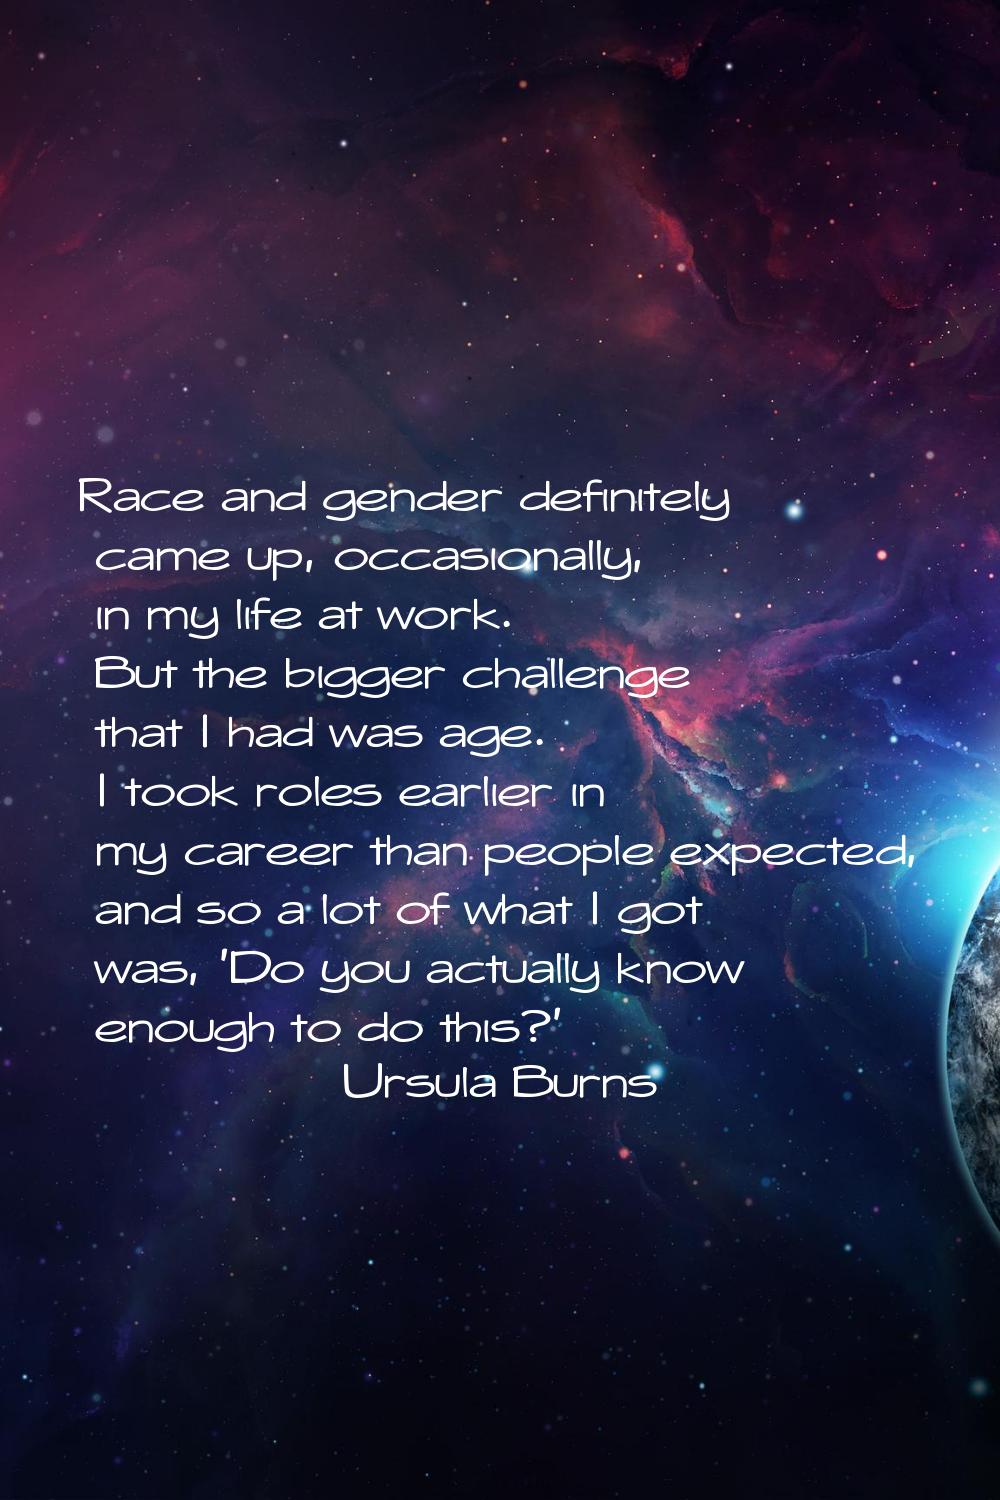 Race and gender definitely came up, occasionally, in my life at work. But the bigger challenge that